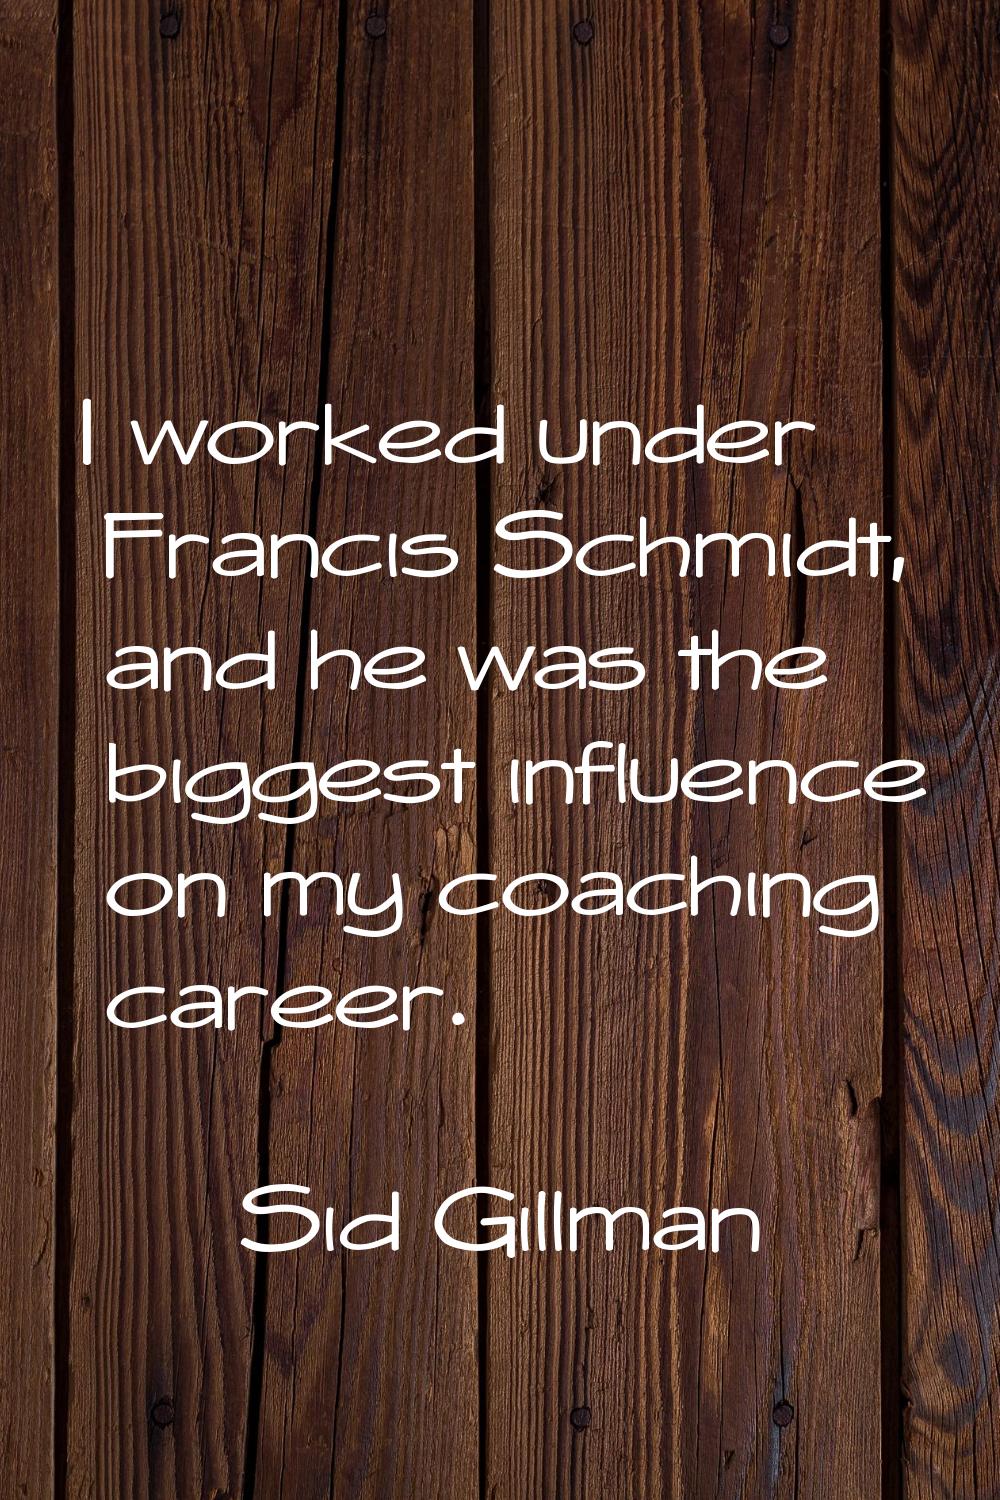 I worked under Francis Schmidt, and he was the biggest influence on my coaching career.